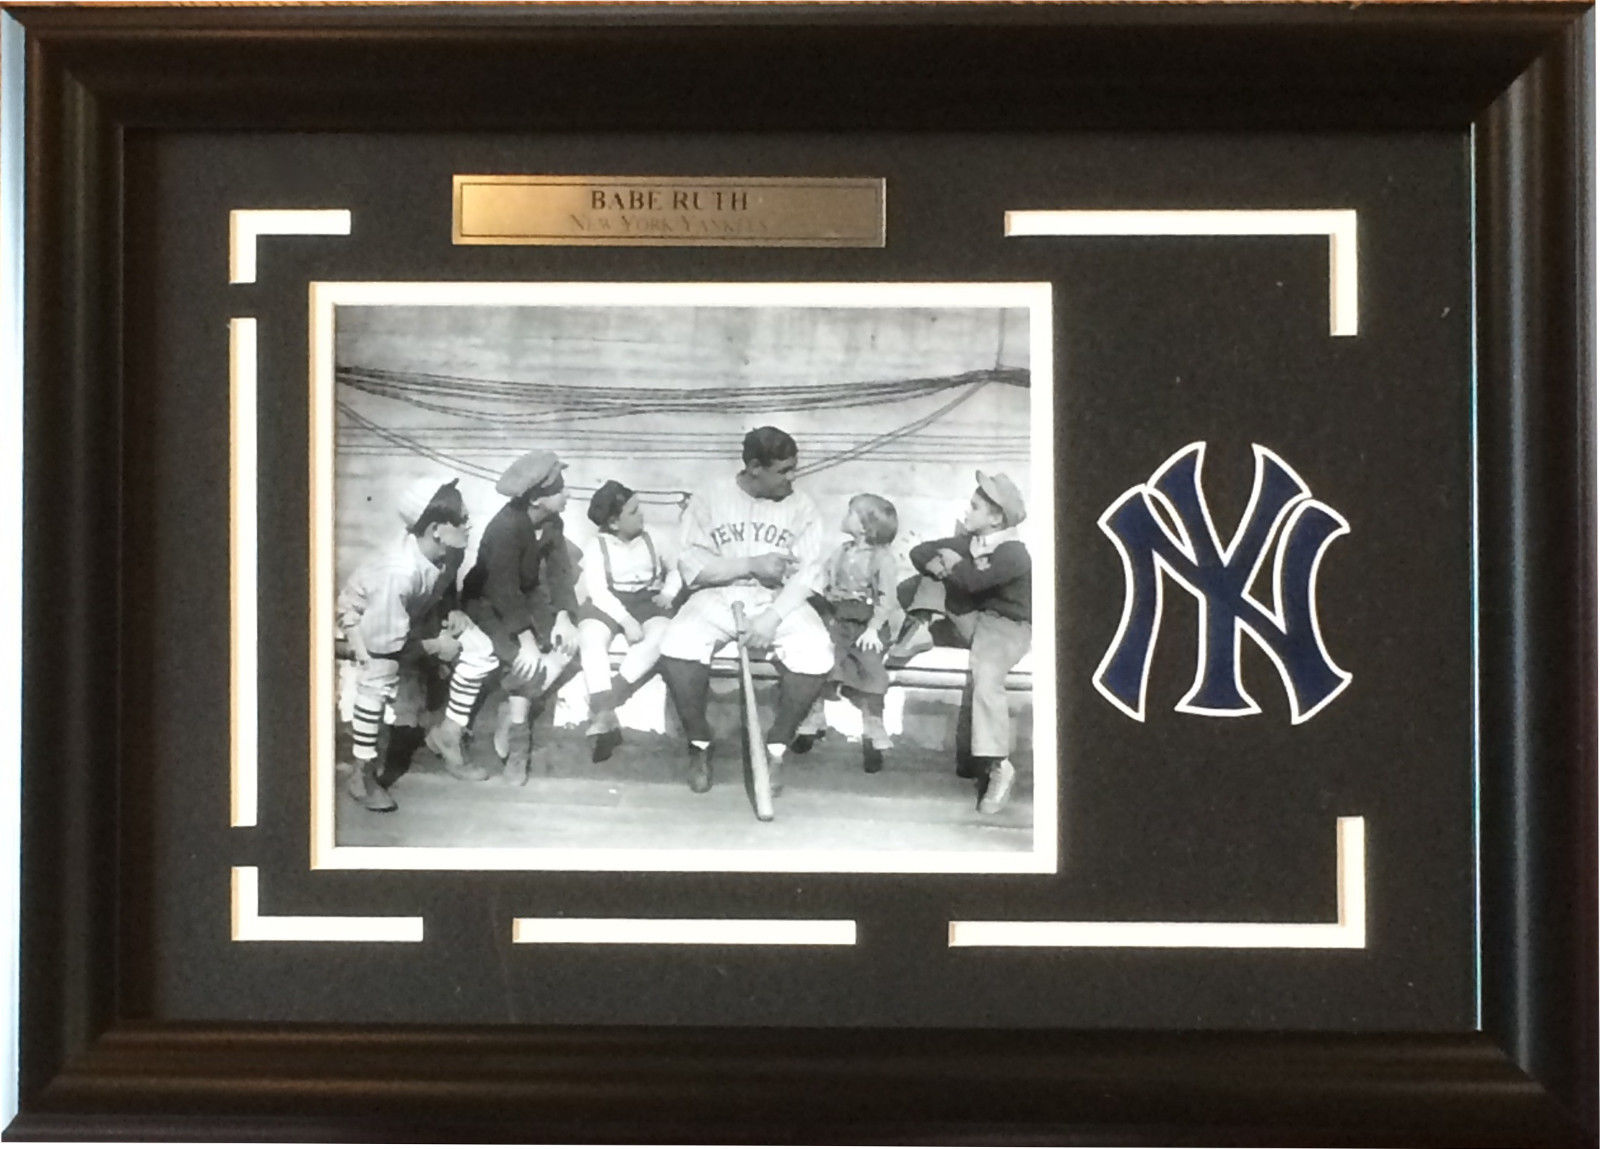 Babe Ruth with kids  New York Yankees logo 8×10 photo framed collage 22×16